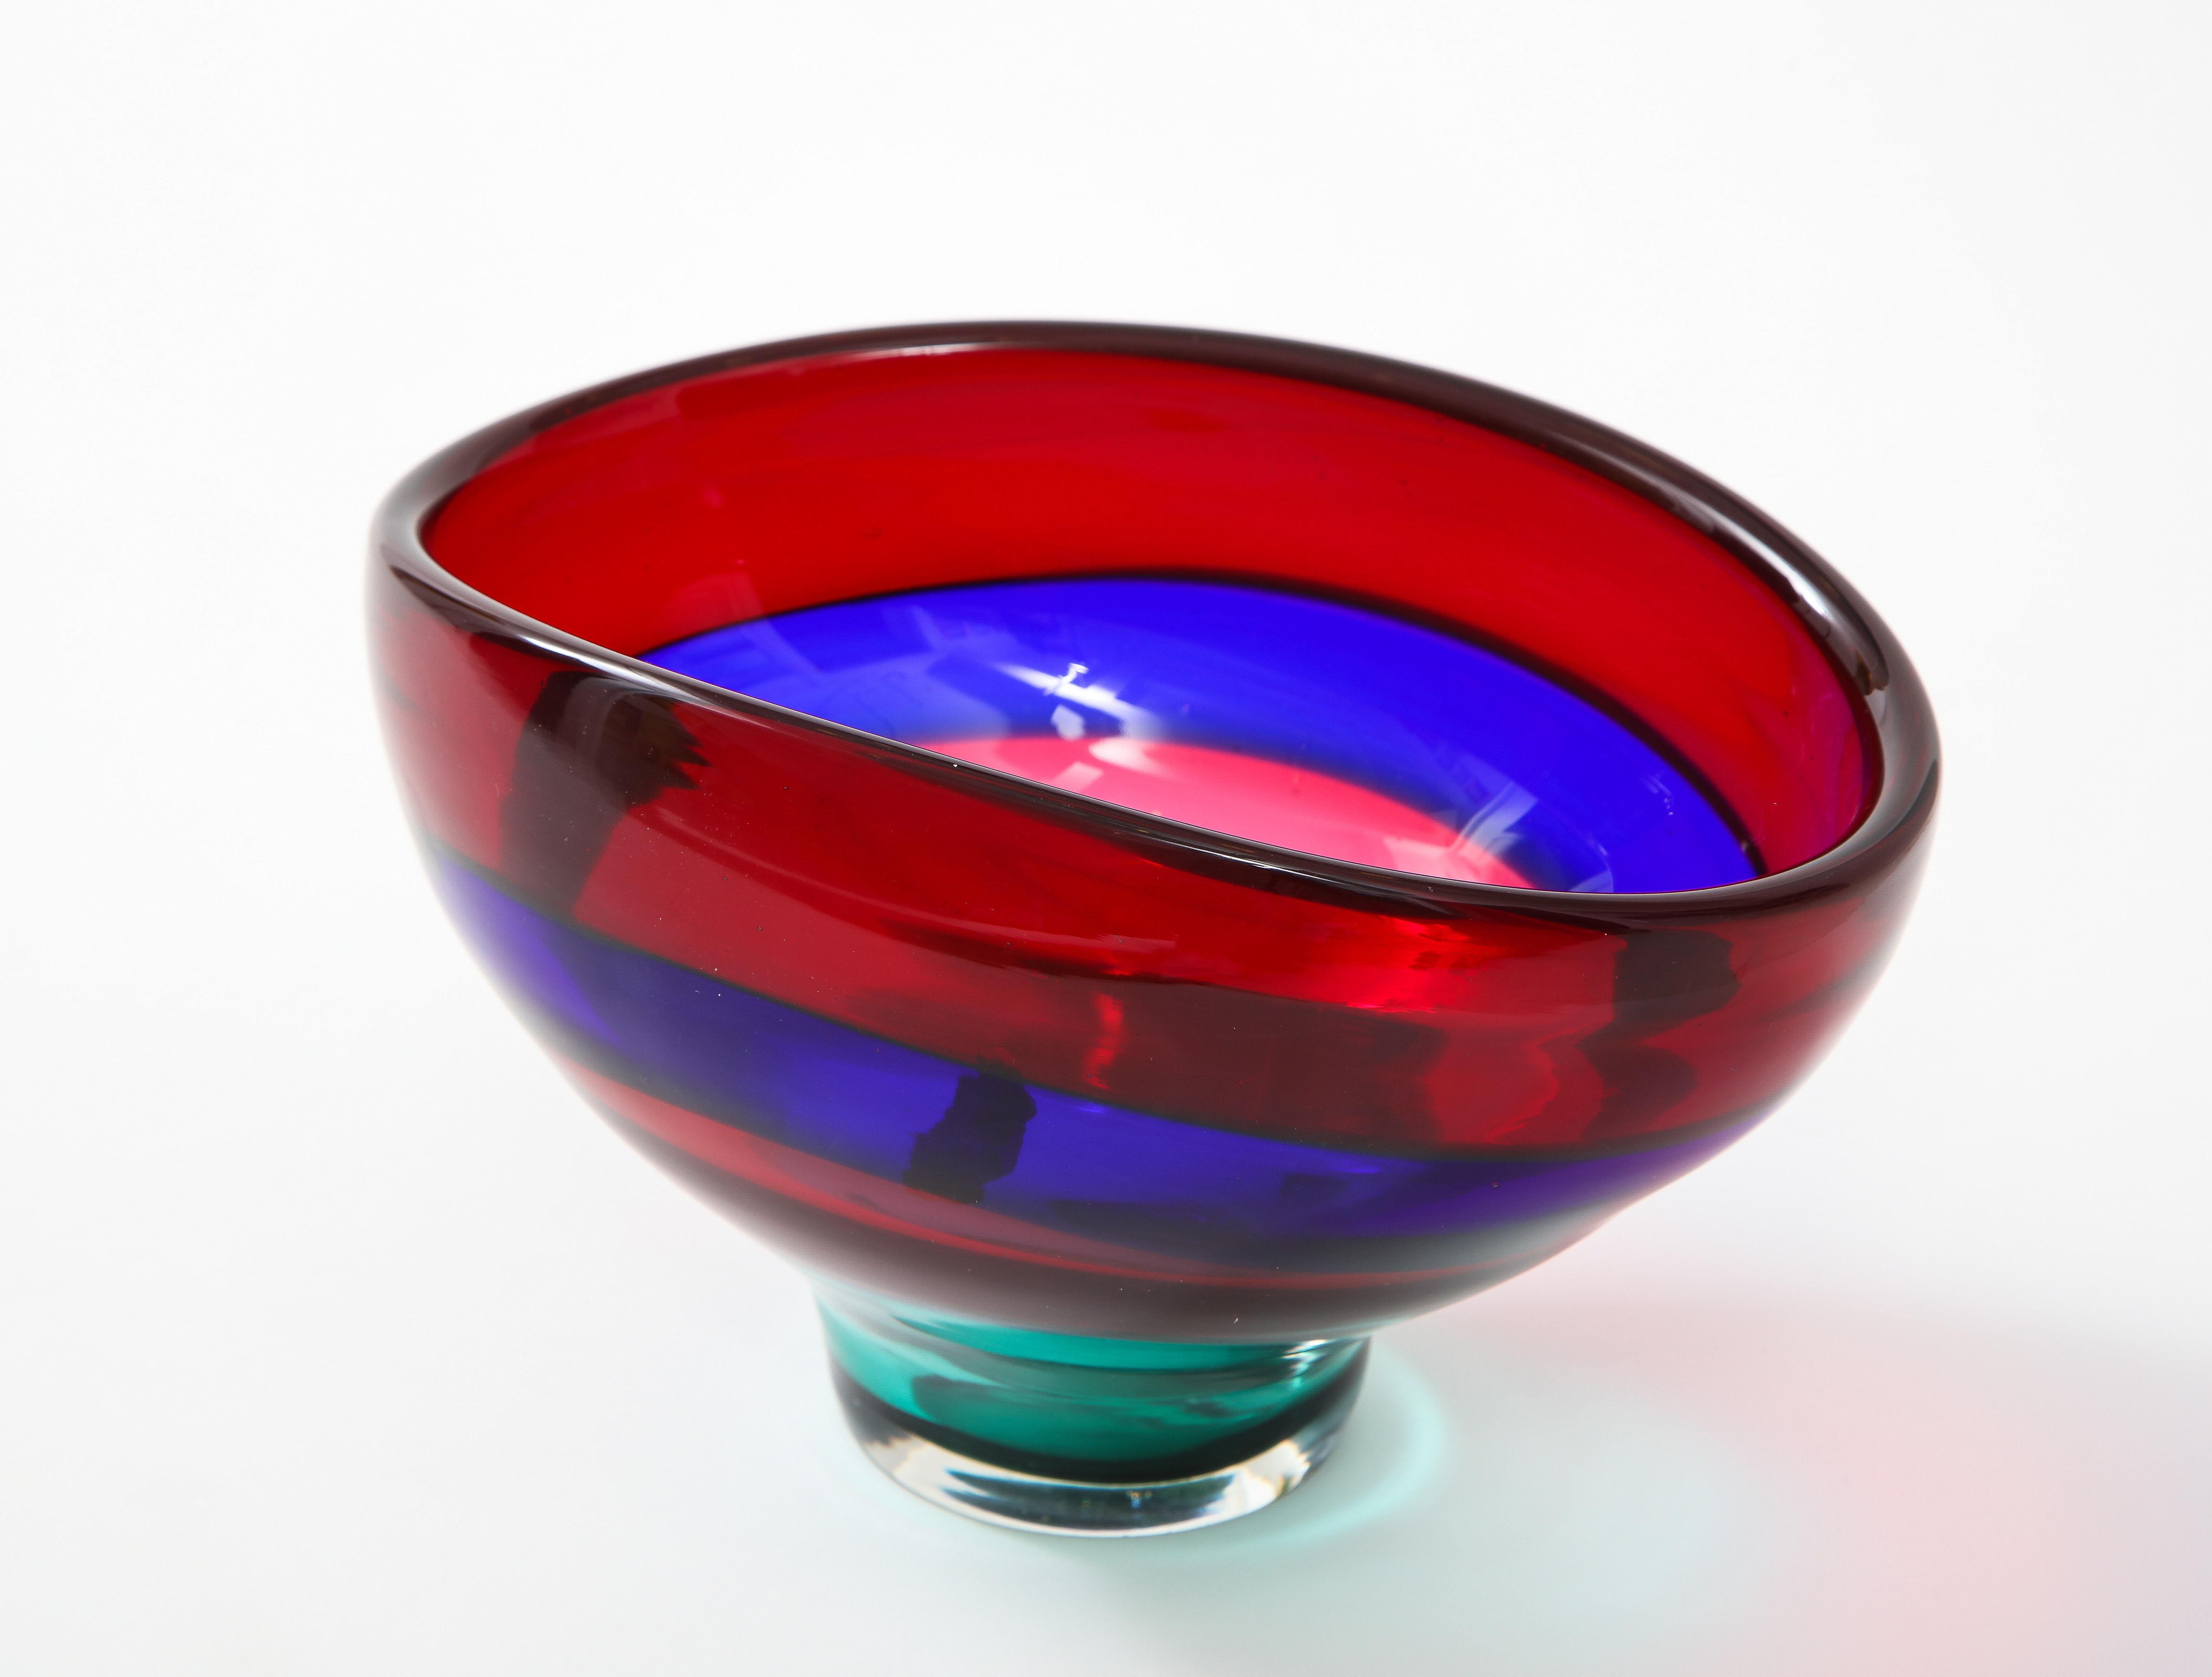 Vibrant Red Blue and Green Murano Glass Bowl by Fluvio Bianconi 2